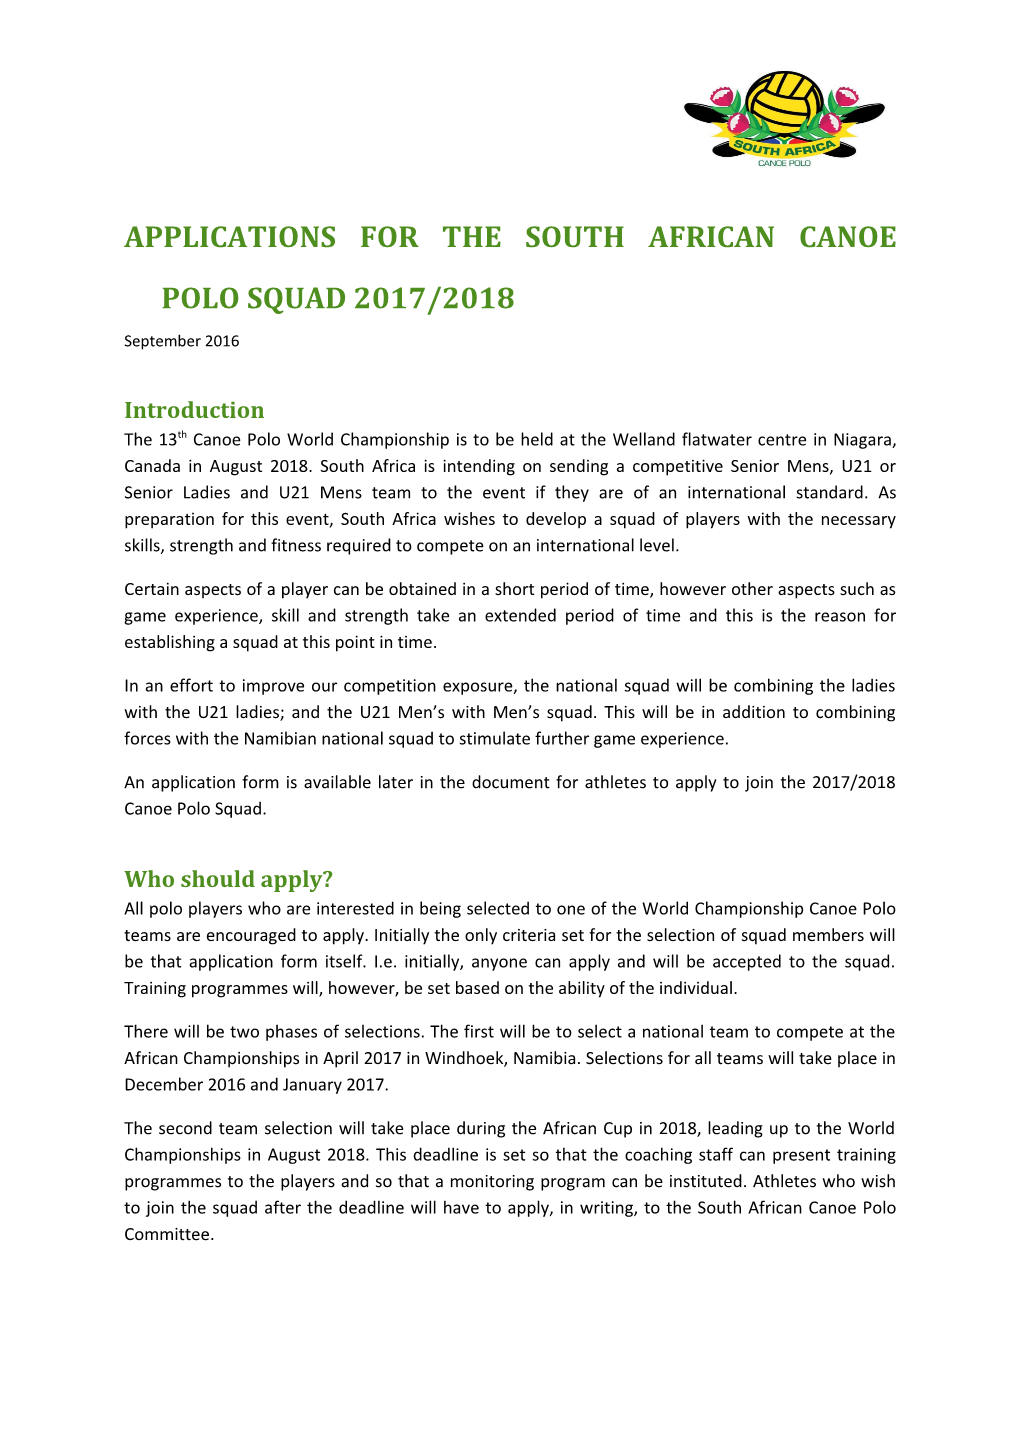 Applications for the South African Canoe Polo Squad 2017/2018